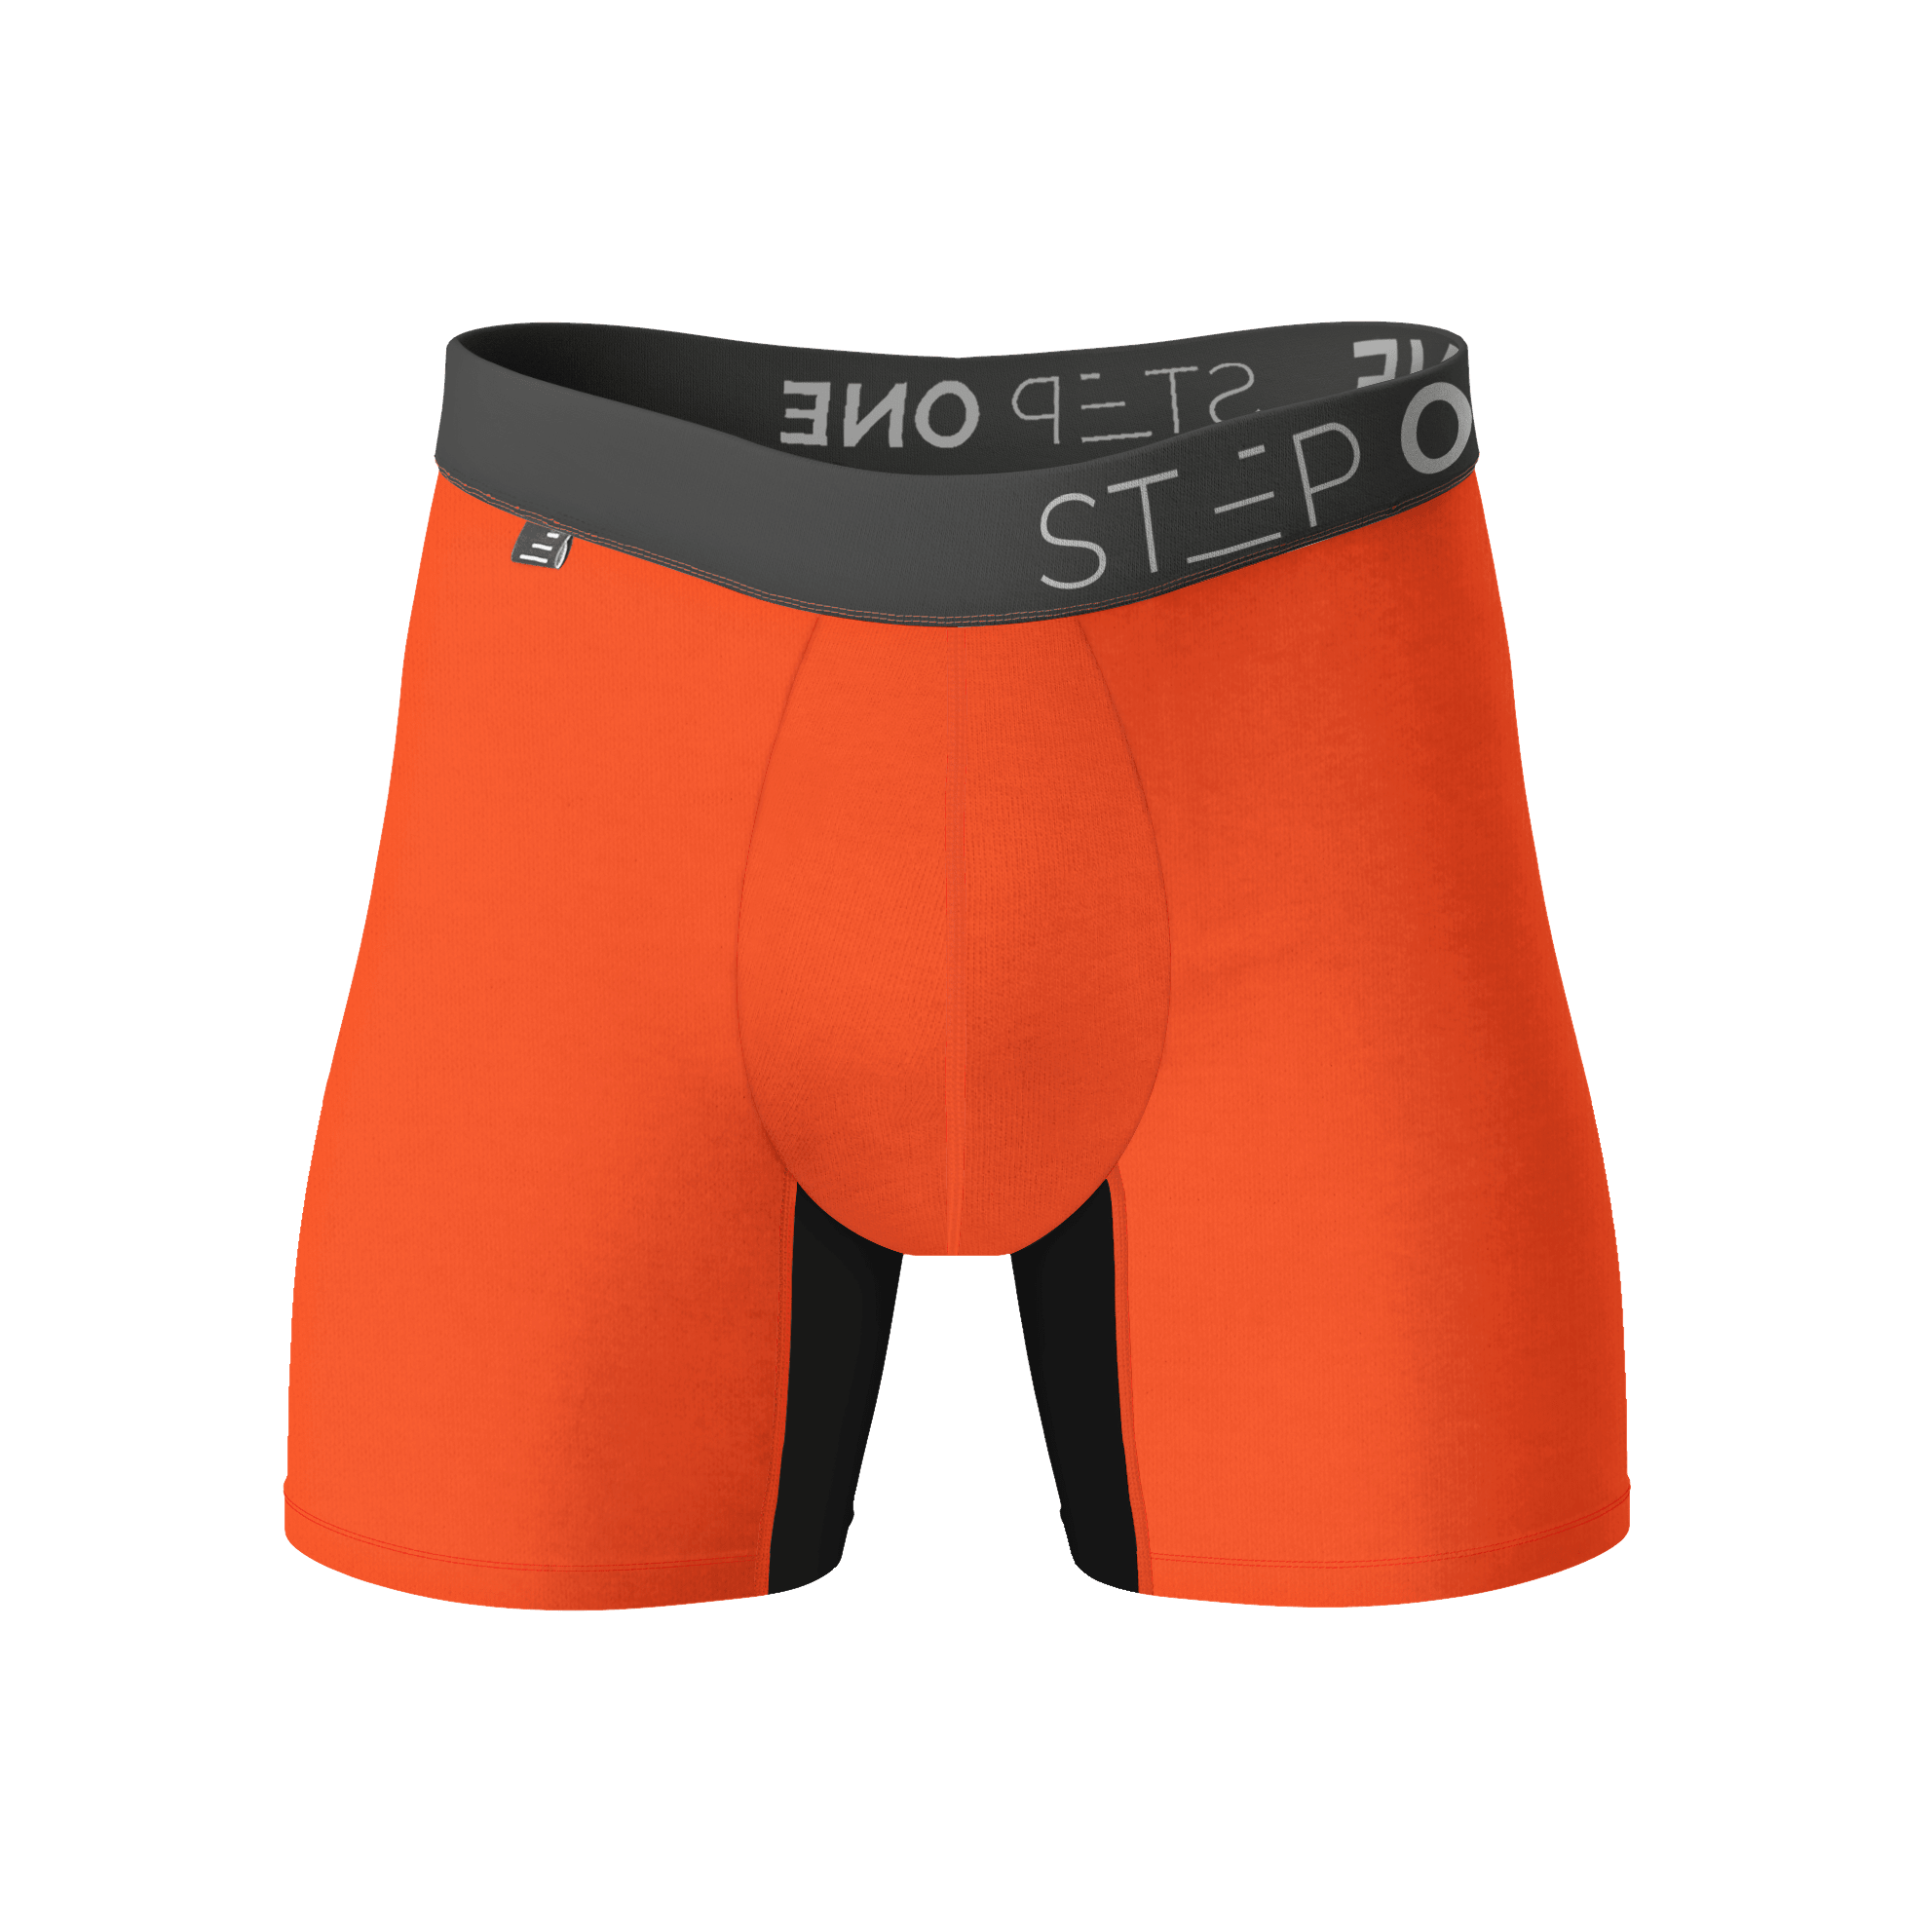 Mens Bamboo Underwear at Step One UK